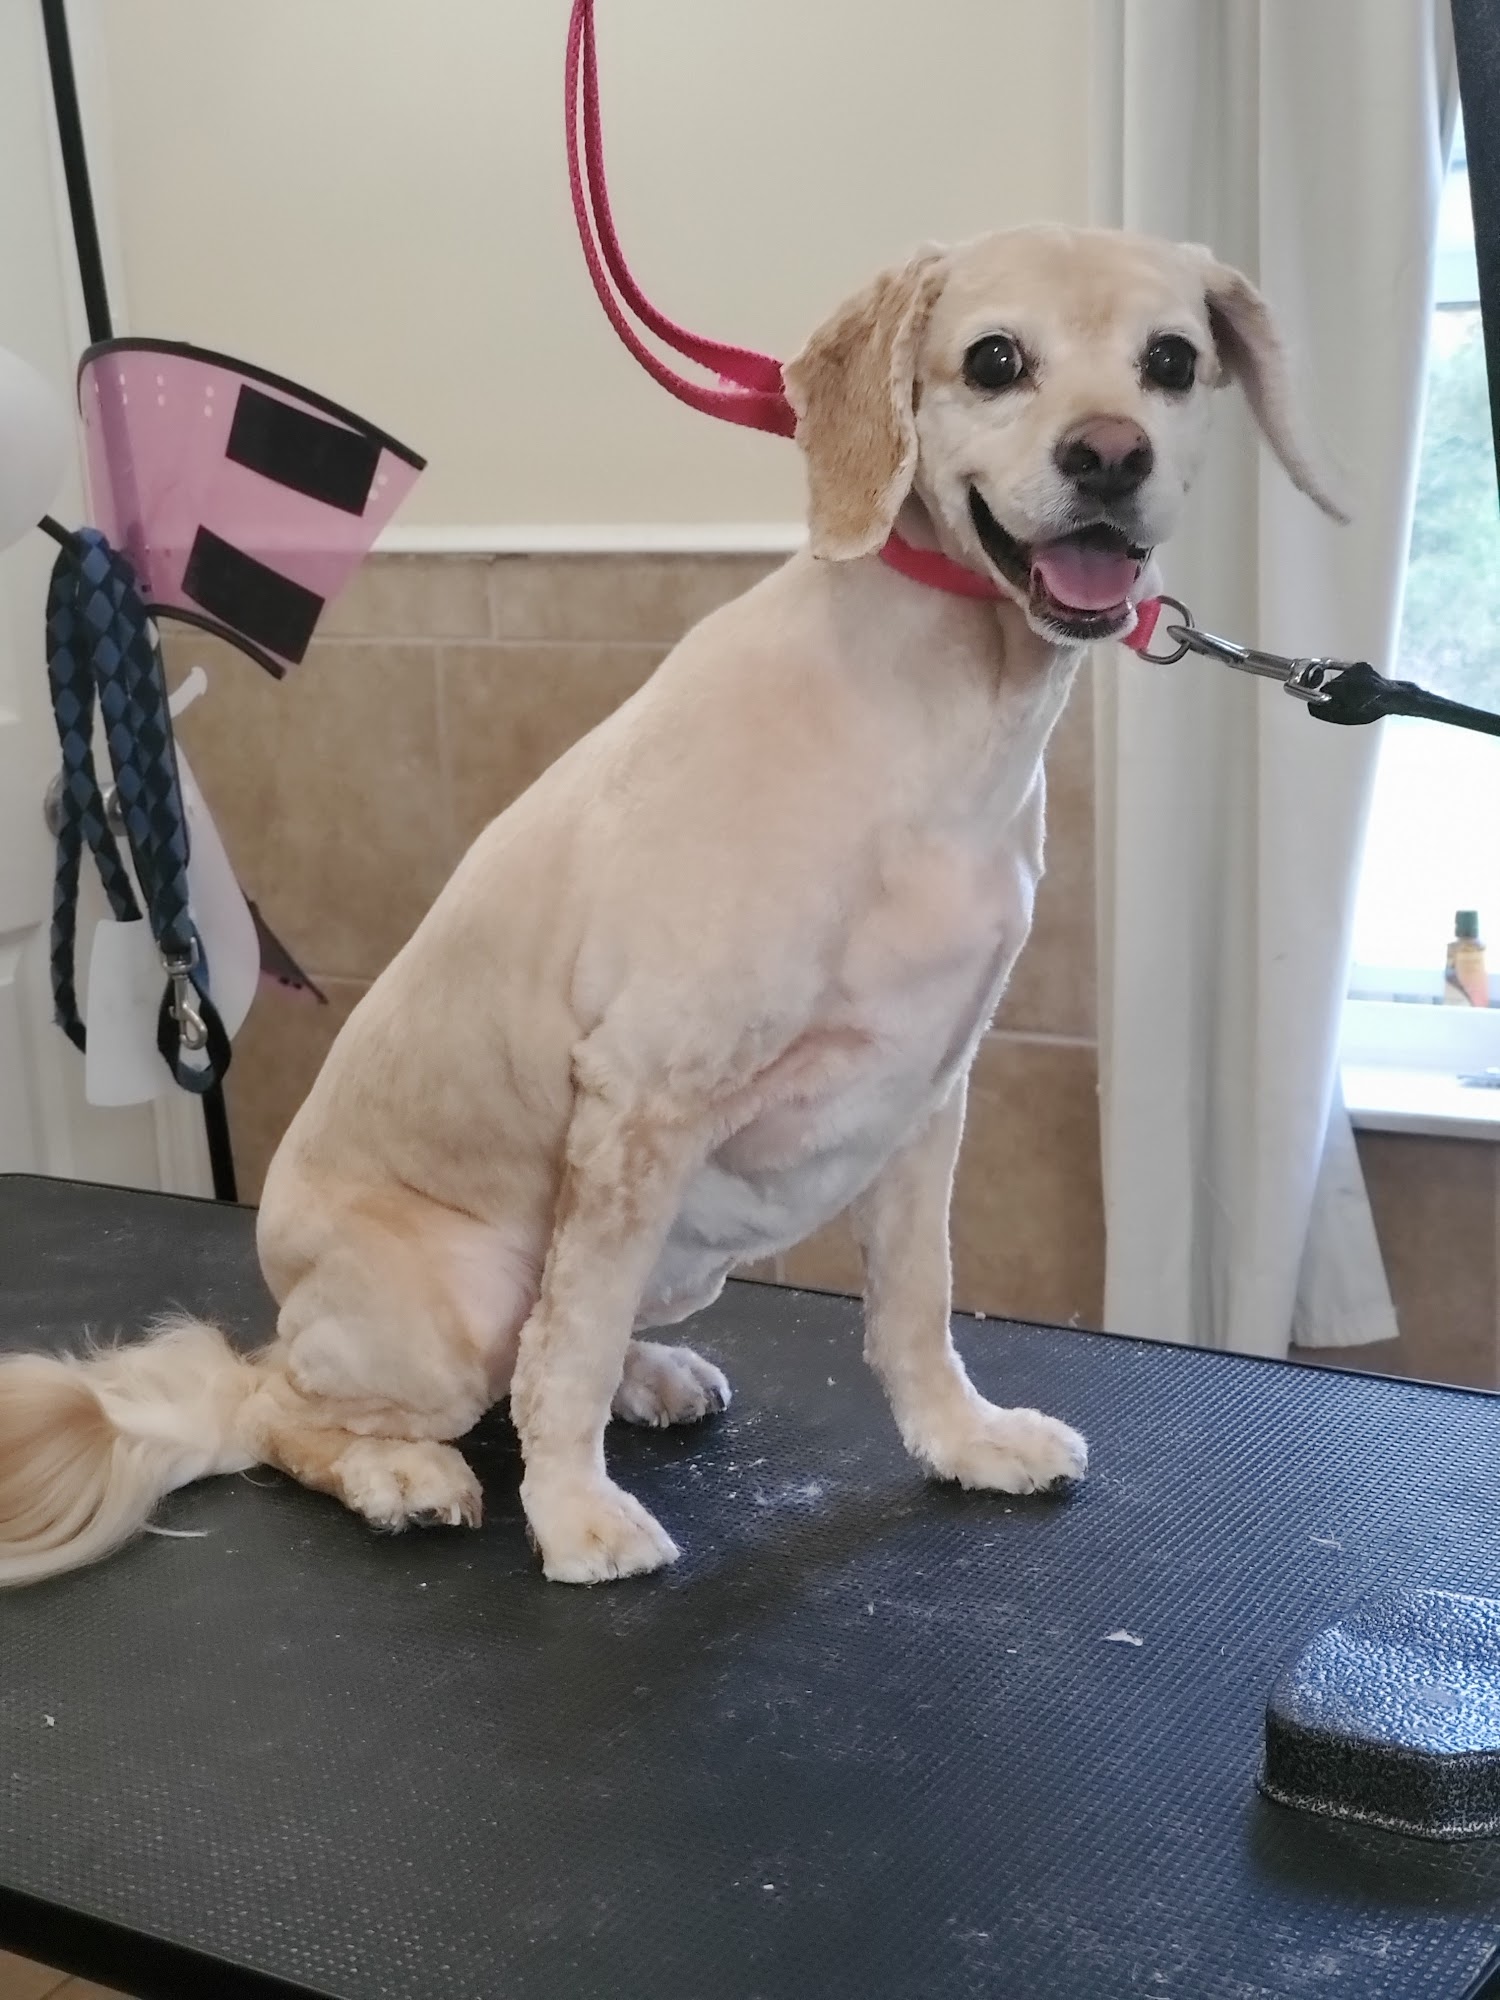 Pawsitively naturals dog spa and grooming 2402 PA-390, Canadensis Pennsylvania 18325